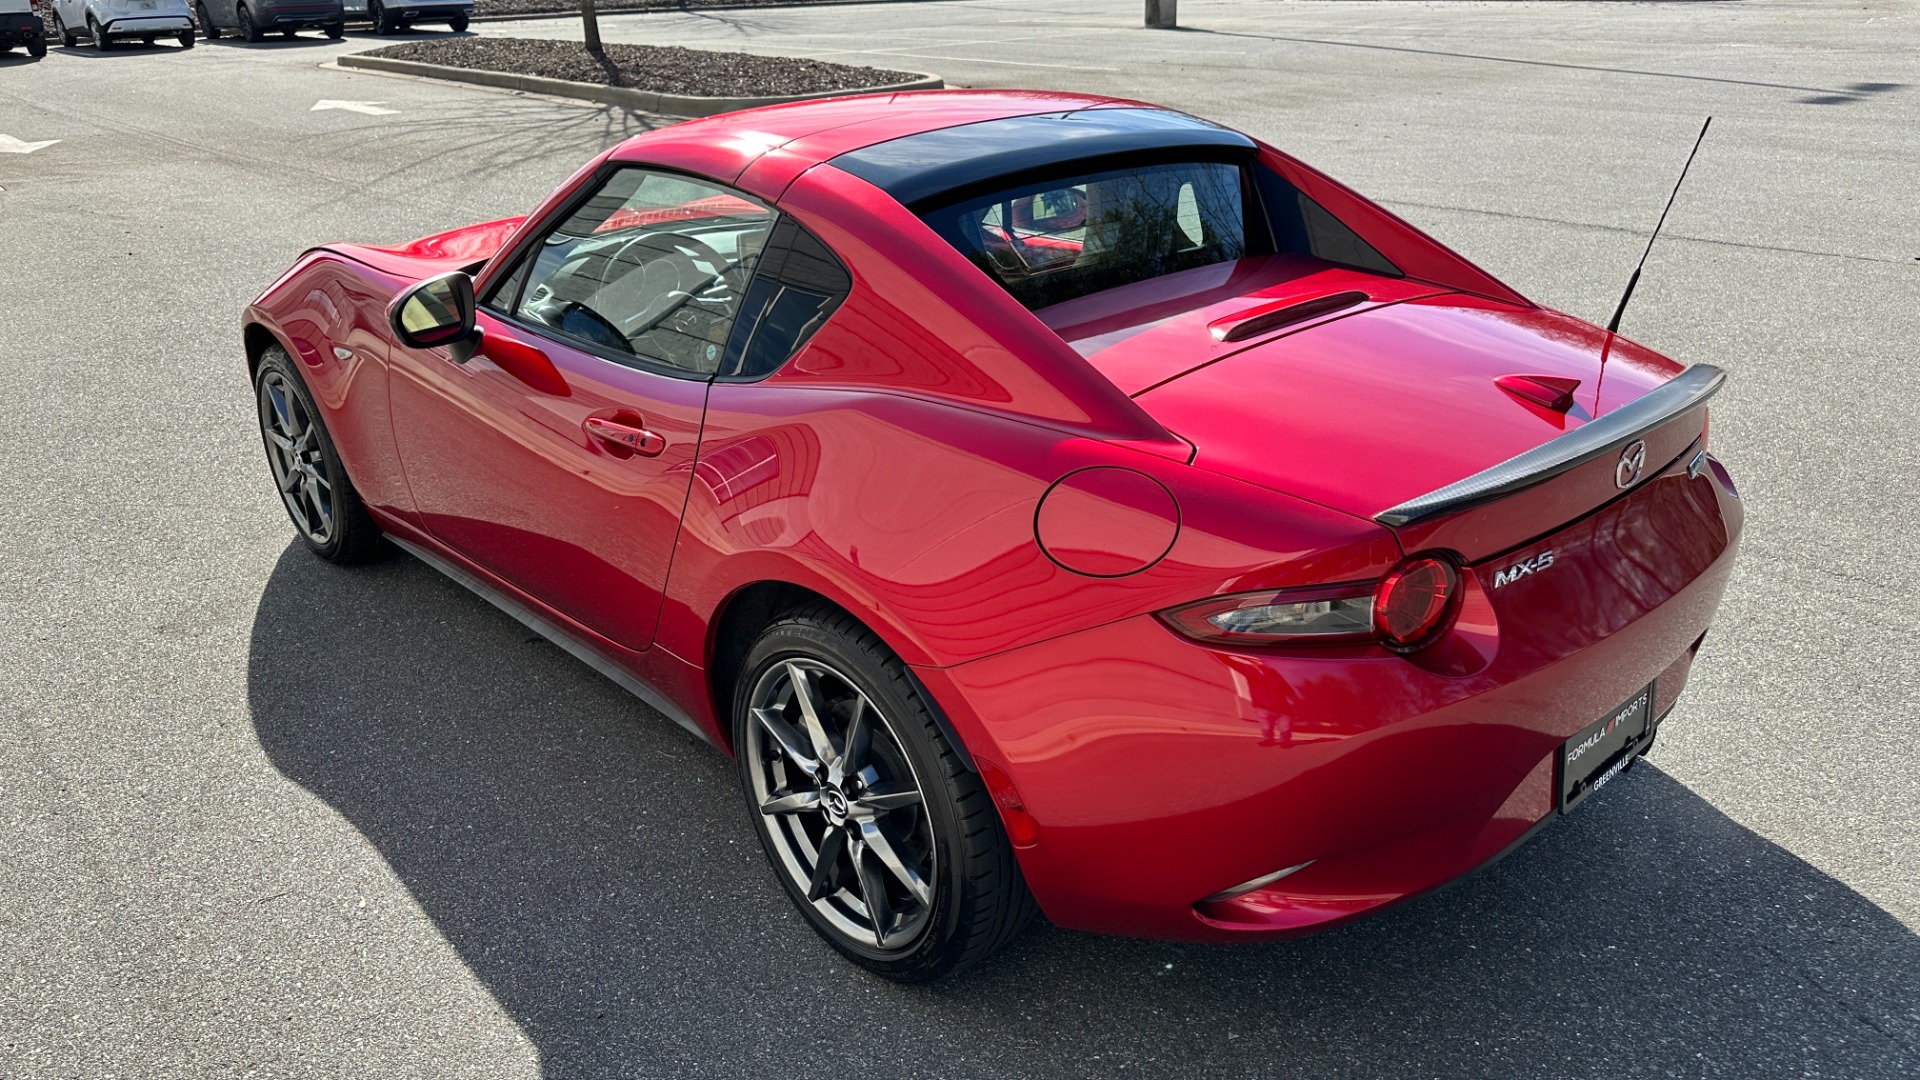 Used 2017 Mazda MX-5 Miata RF GRAND TOURING / POWER HARD TOP CONVERTIBLE / AUTOMATIC for sale $22,995 at Formula Imports in Charlotte NC 28227 10